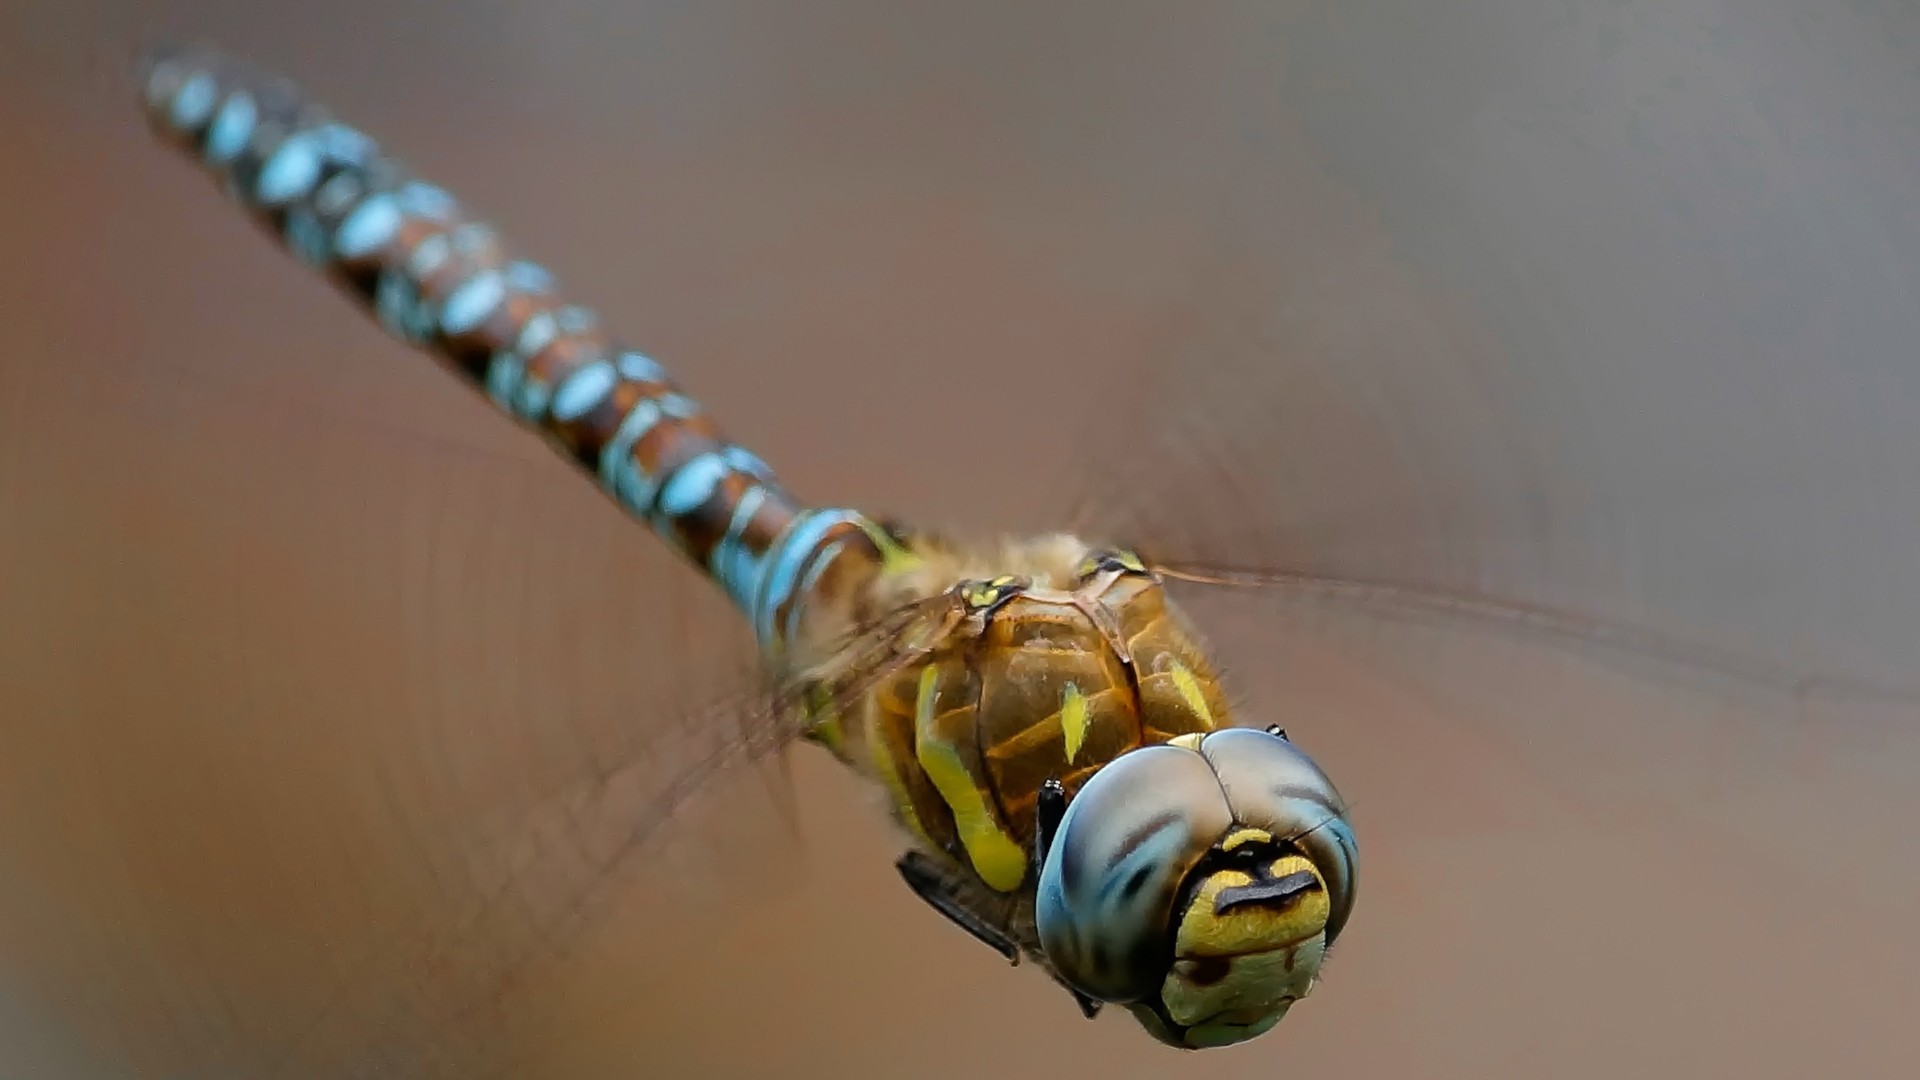 Dragonflies Insect Macro 1920x1080